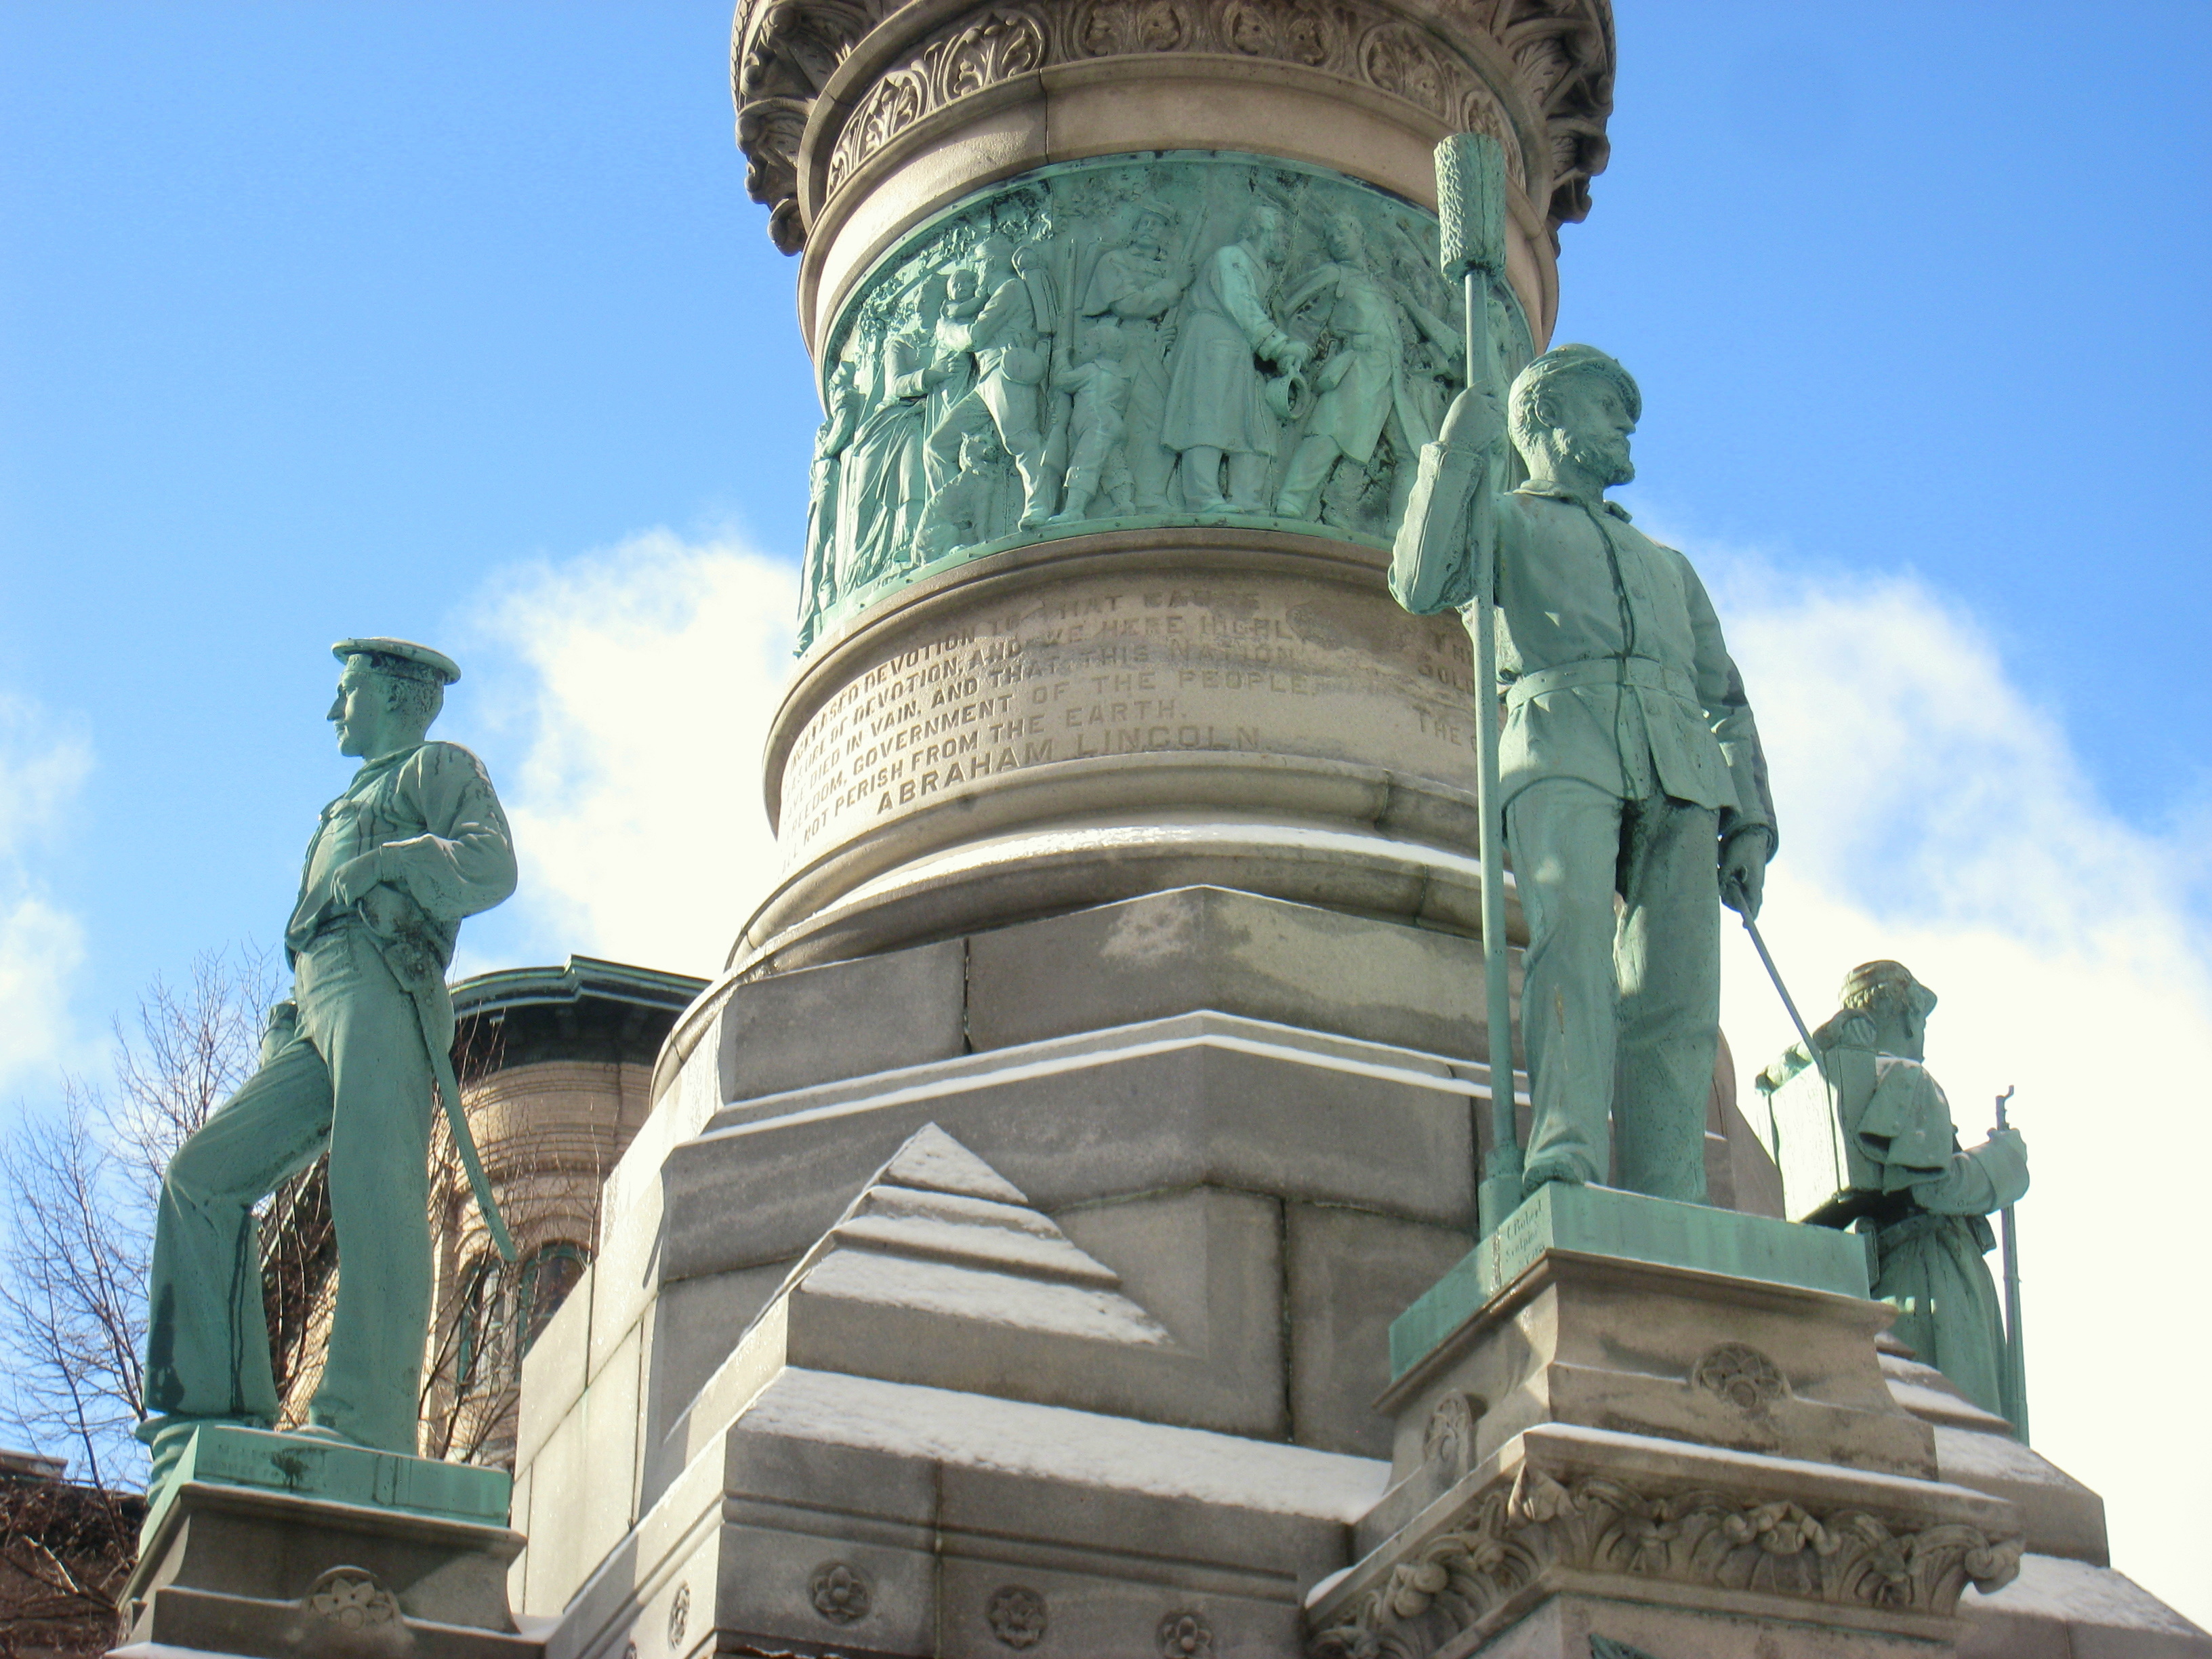 File:Soldiers Sailors Monument, Buffalo, NY 3732.JPG - Commons